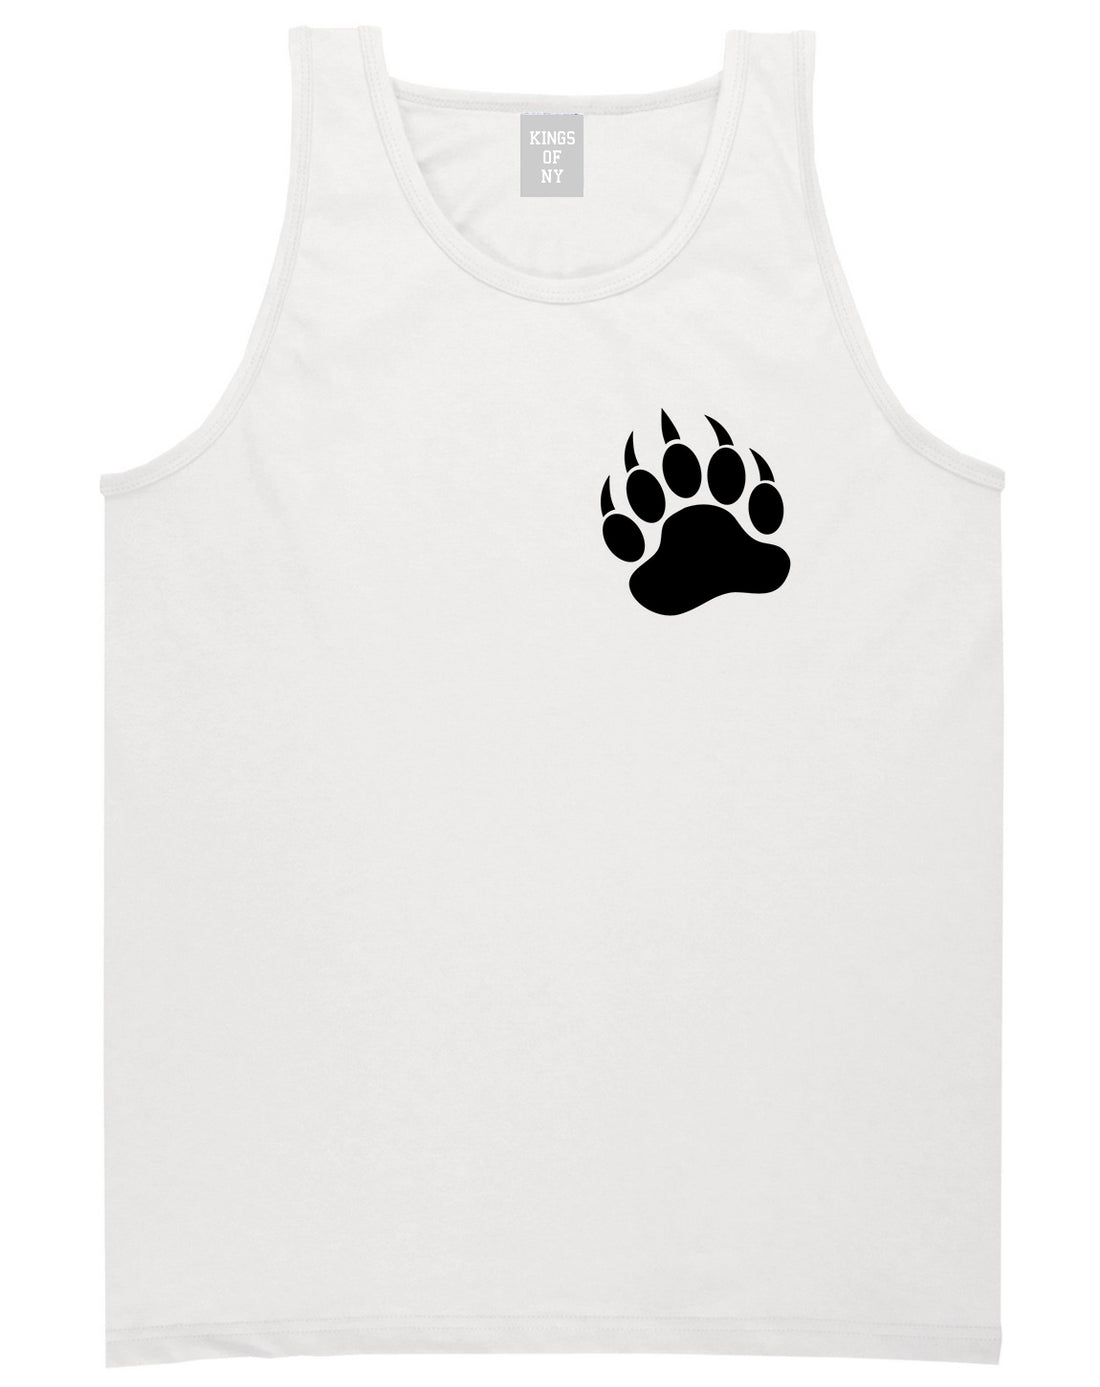 Bear Paws Chest White Tank Top Shirt by Kings Of NY